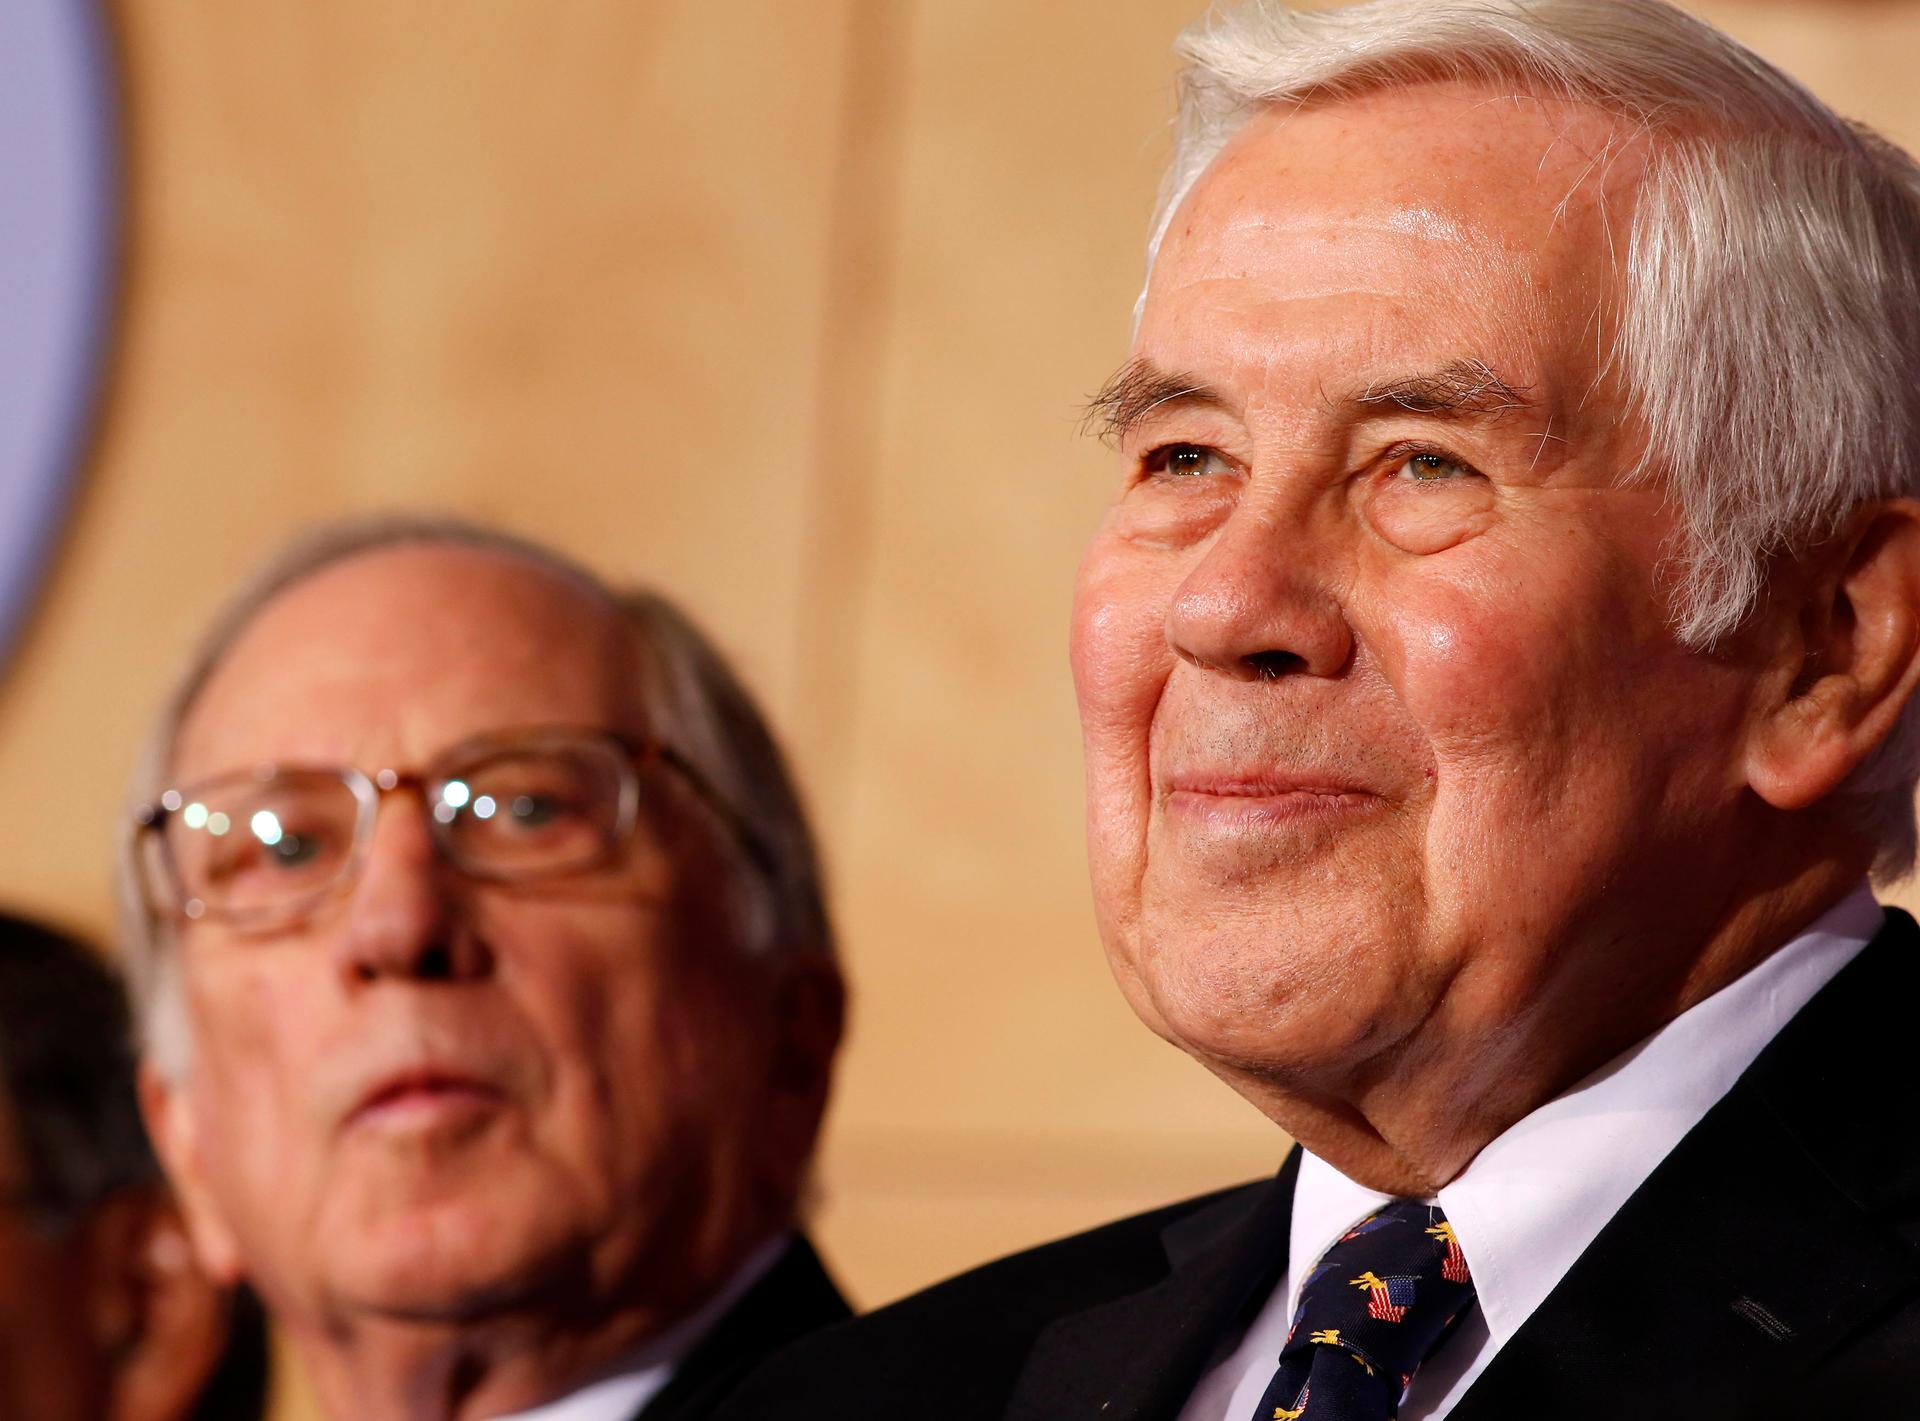 U.S. Senator Richard Lugar (R) joins Co-chairman and chief executive officer of the Nuclear Threat Initiative, Sam Nunn at the National Defense University in Washington, on December 3, 2012.